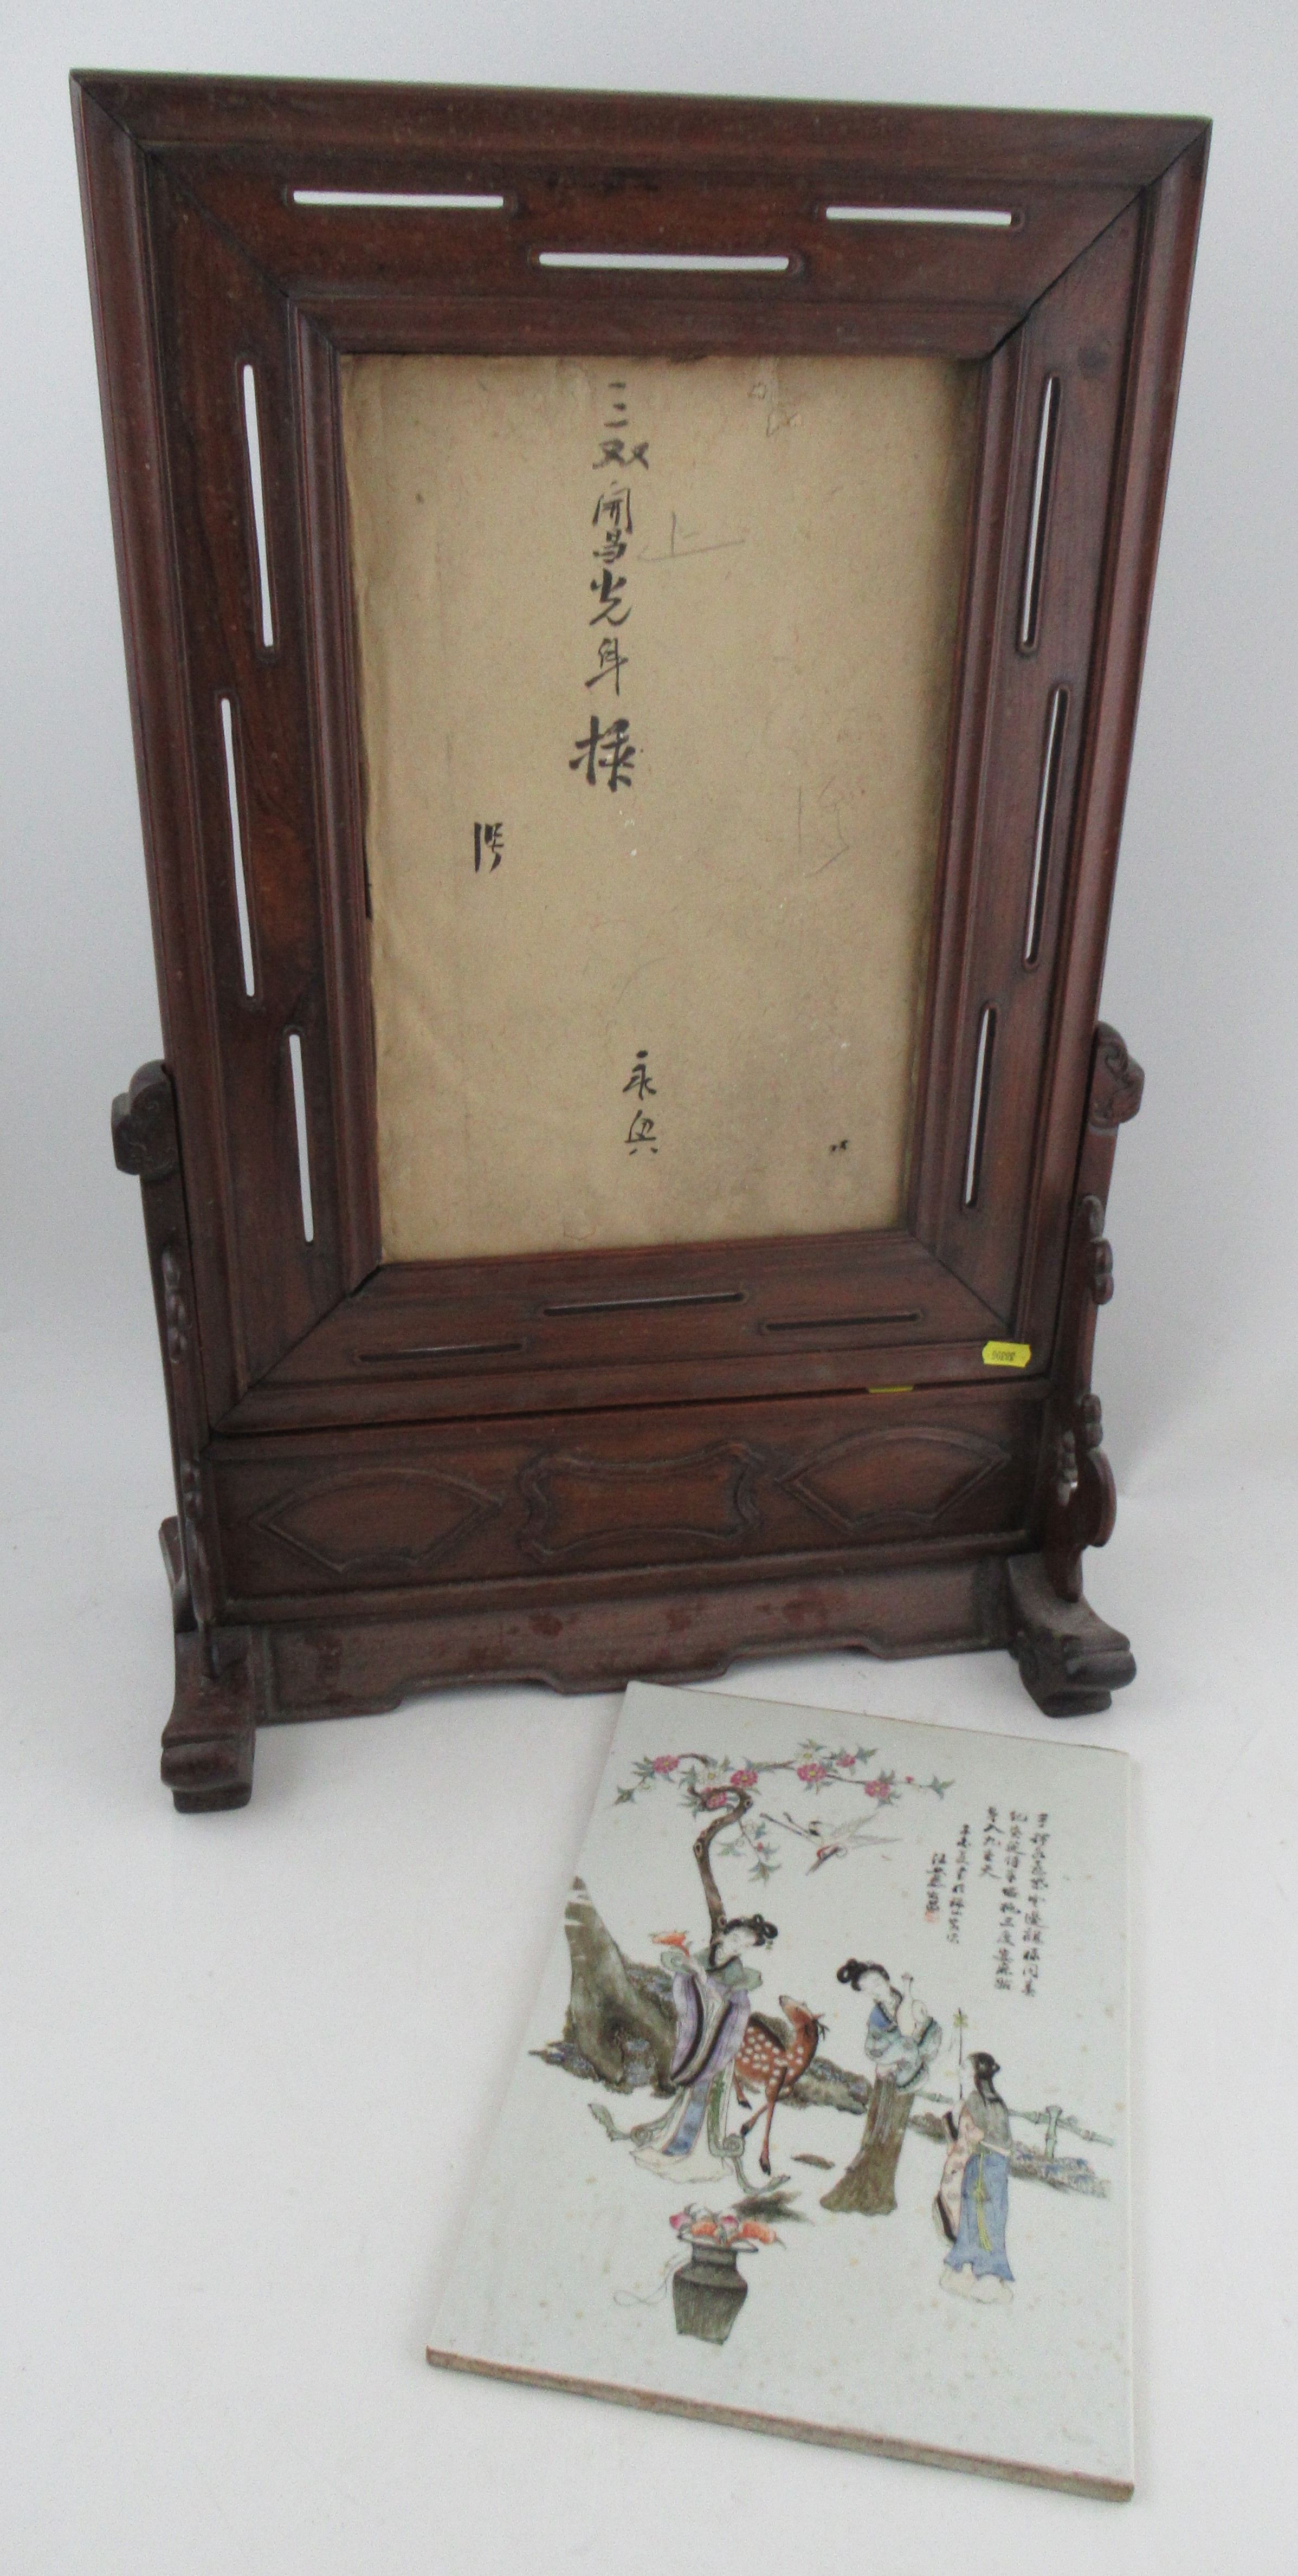 A Republic period Chinese plaque, decorated with figures, deer and foliage, character script,